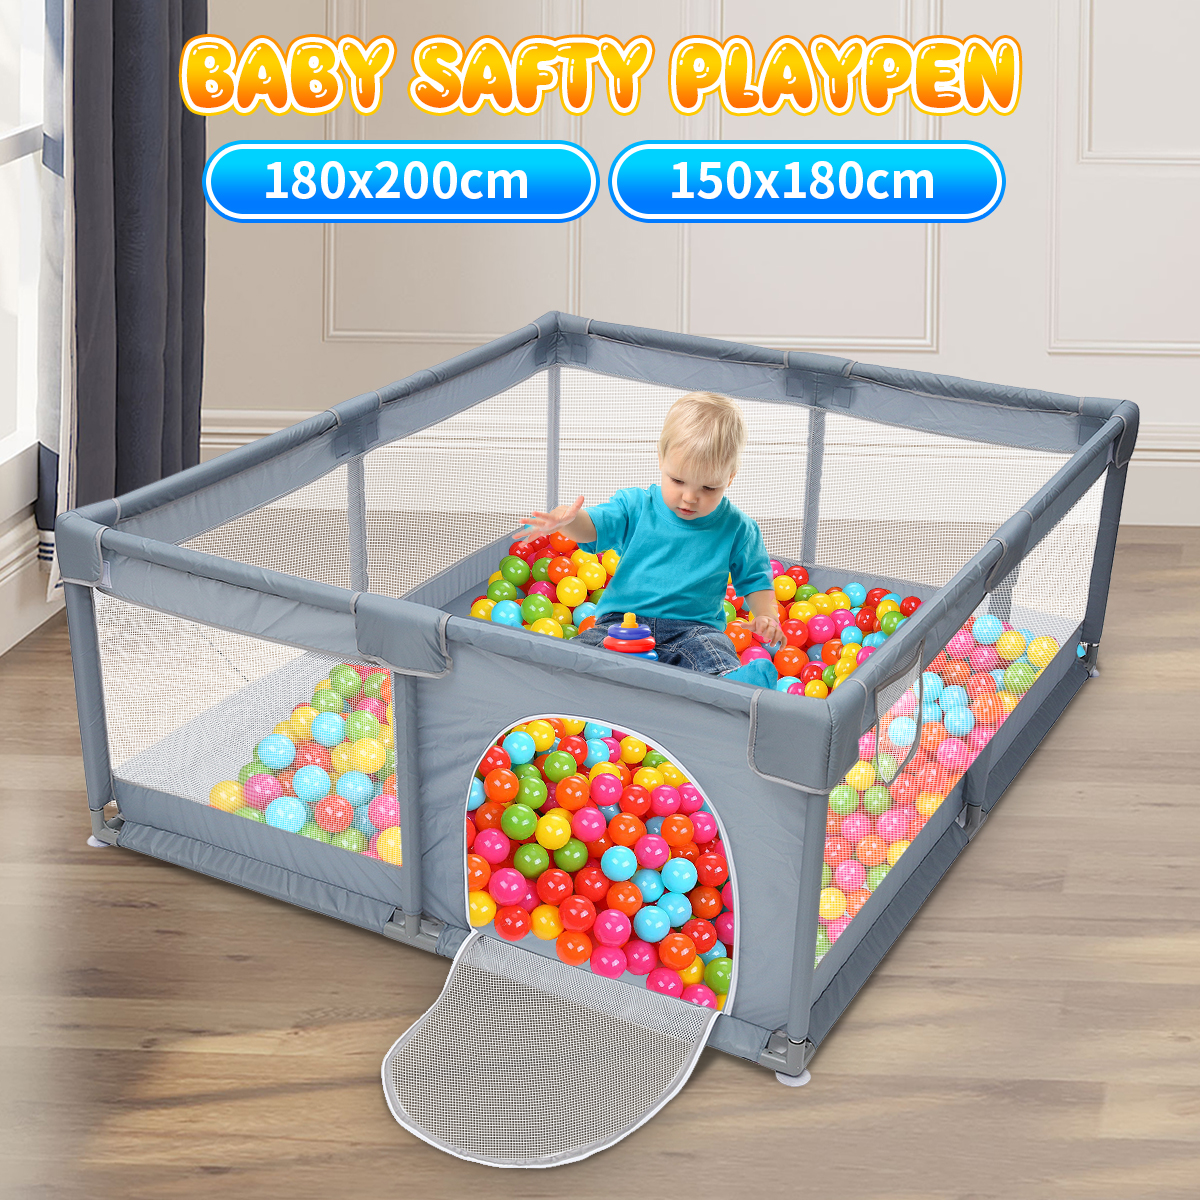 79-Baby-Playpen-Infants-Toddler-Safety-Kids-Packable--Portable-Play-Pens-Activity-Play-Yard-Gate-for-1935215-1